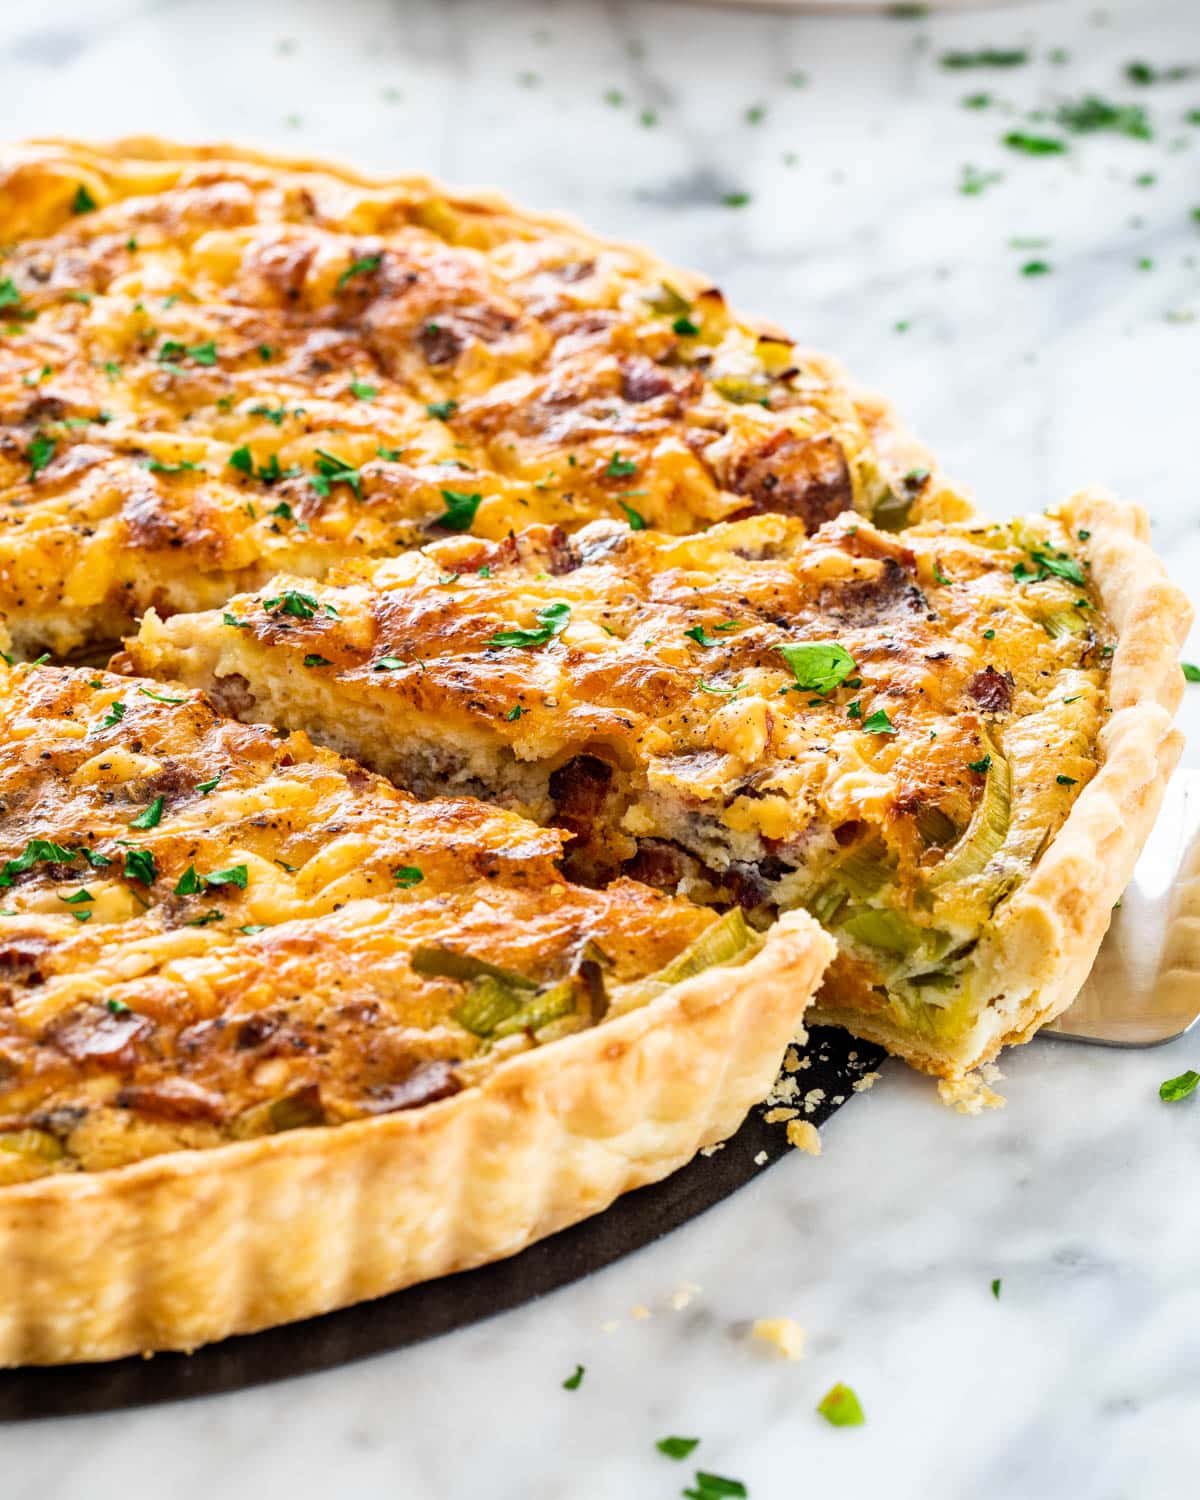 Easy Quiche Recipe - Craving Home Cooked